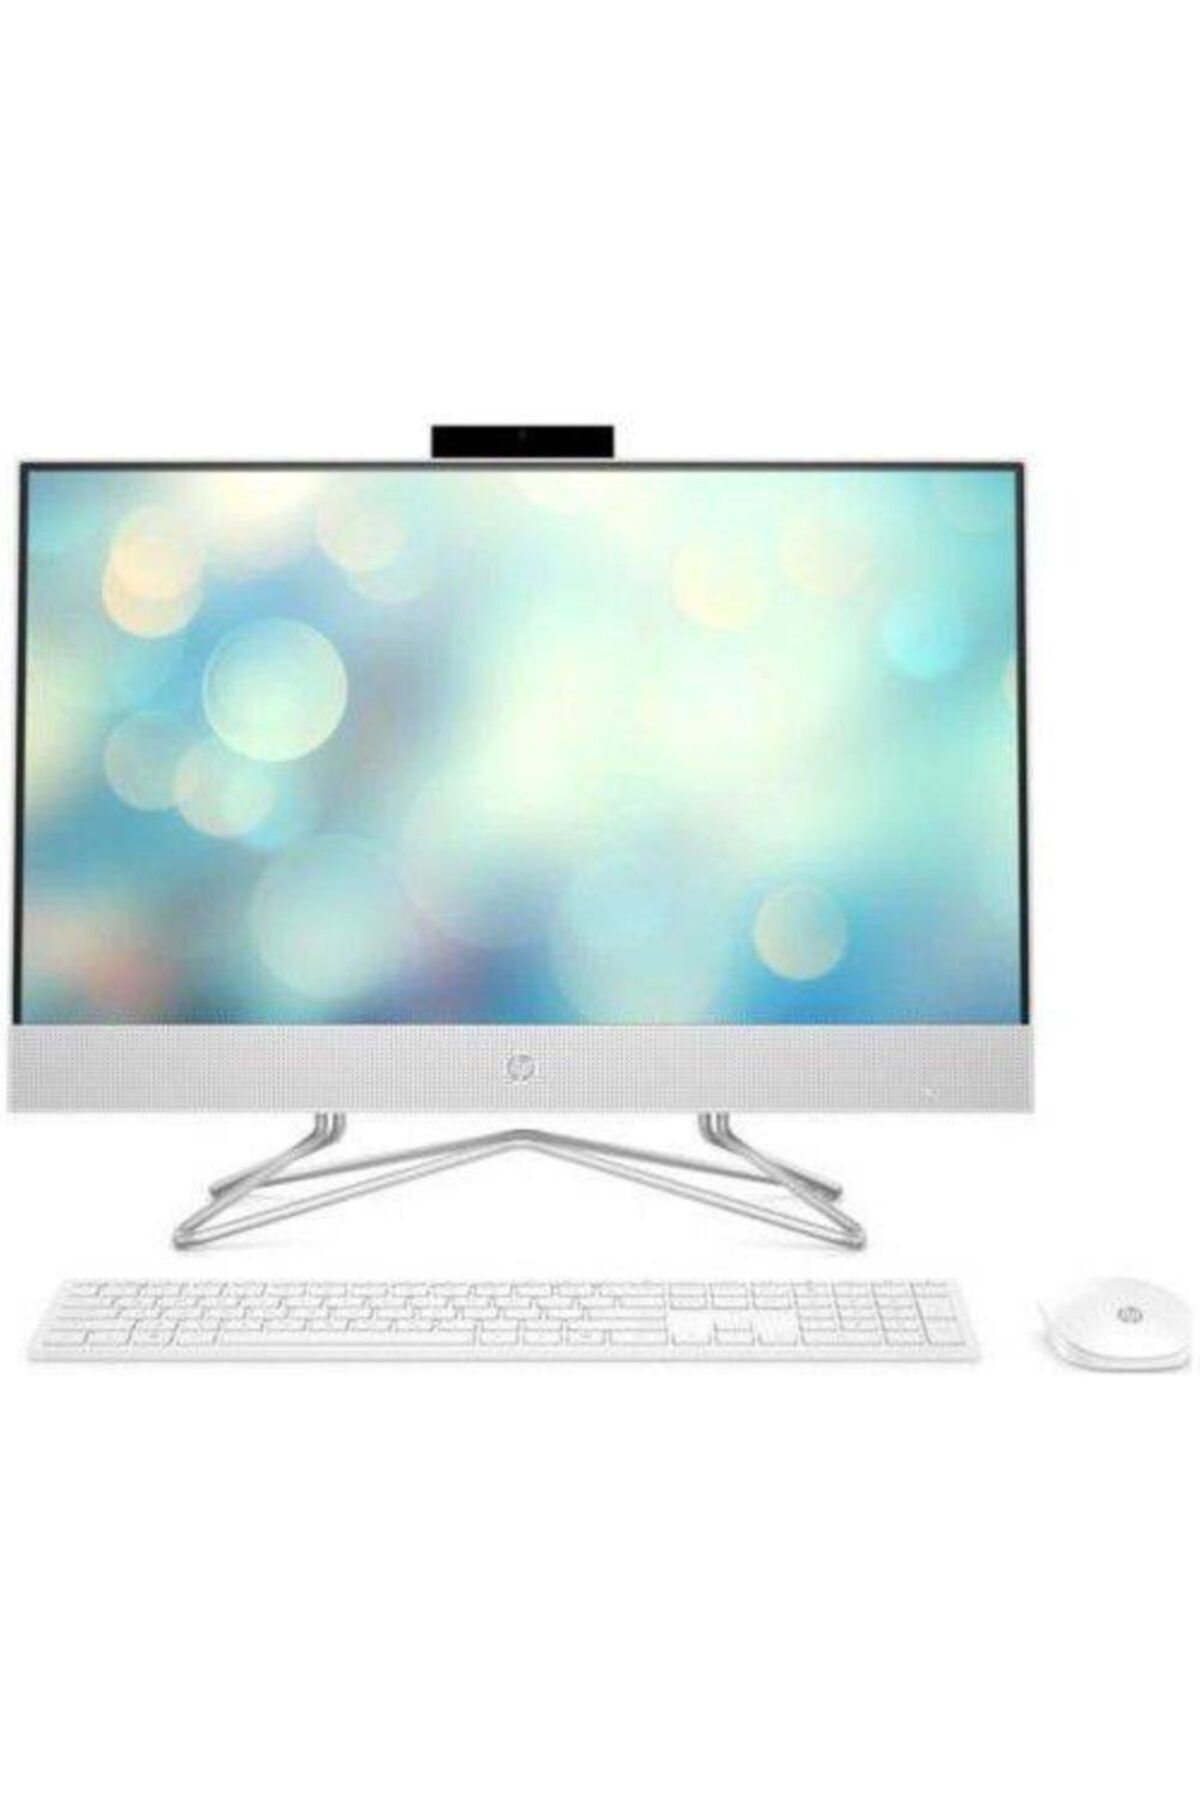 HP 308u1ea Intel Core I5 10400t 2 Ghz 8 Gb 512 Gb Ssd Intel Uhd 630 Wın10 23.8'' All In One Pc